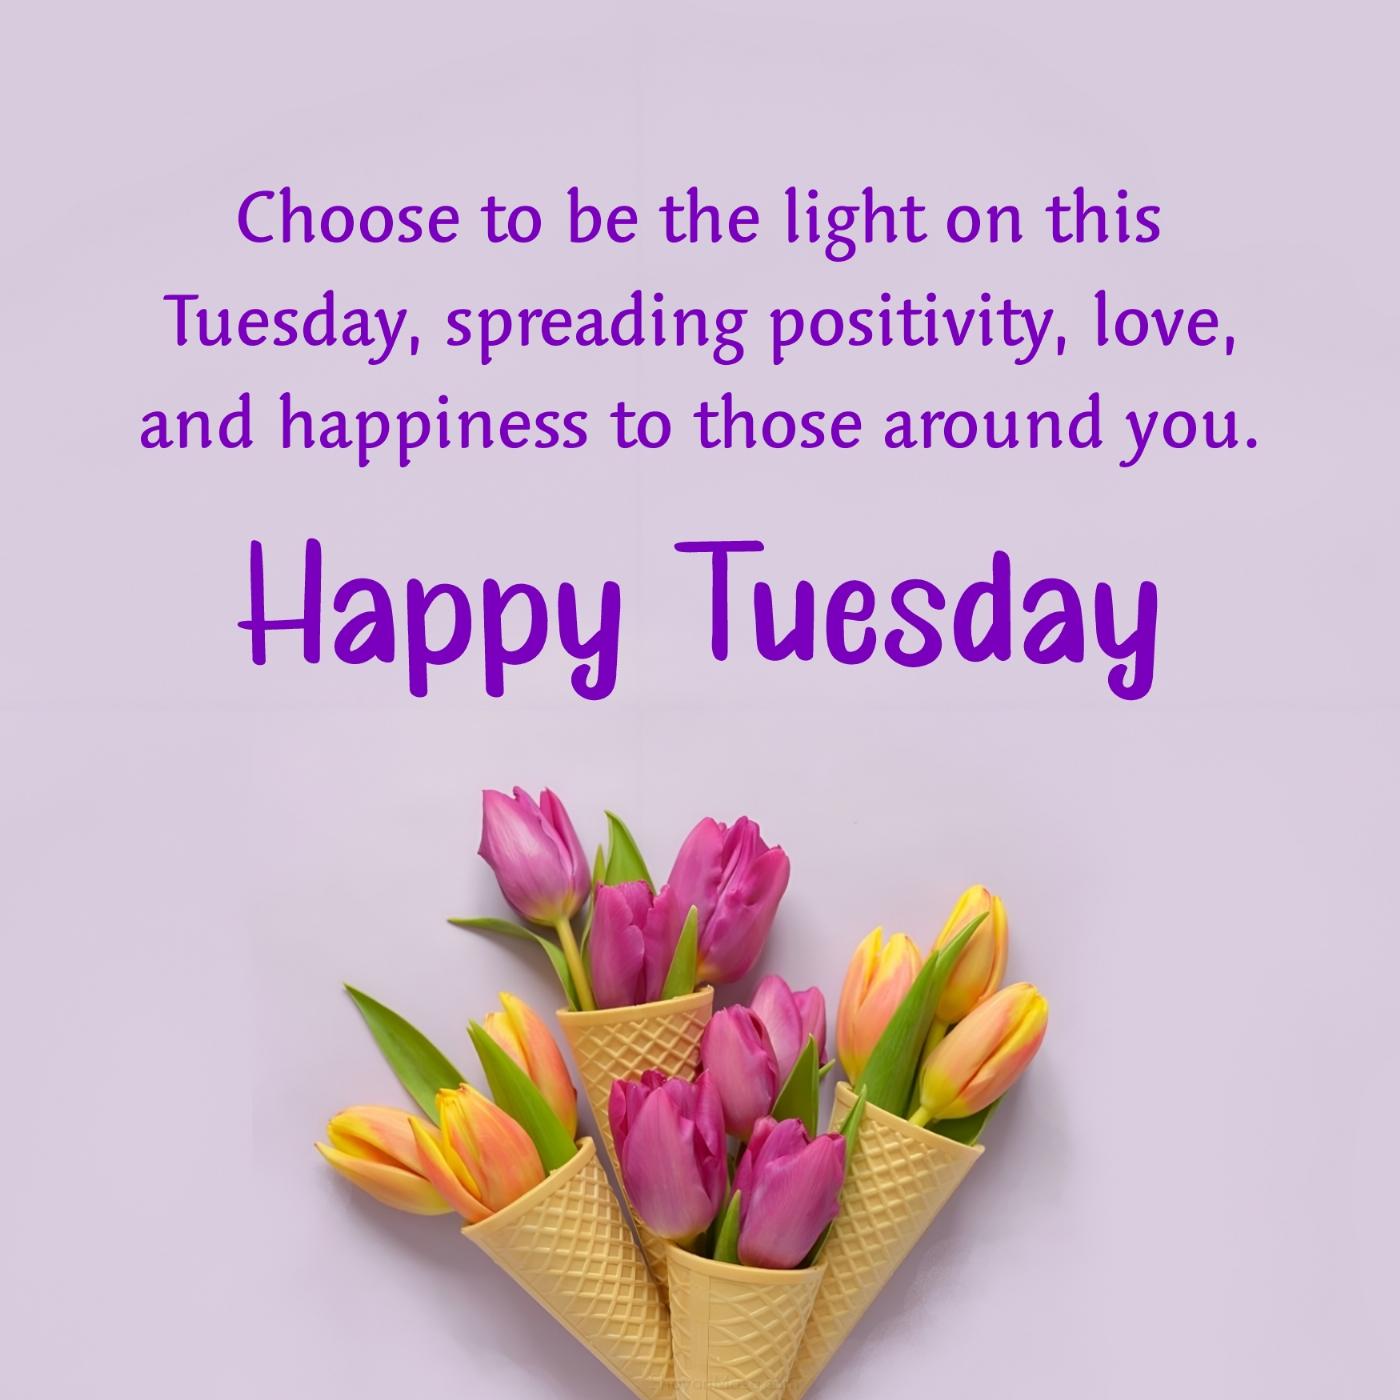 Choose to be the light on this Tuesday spreading positivity